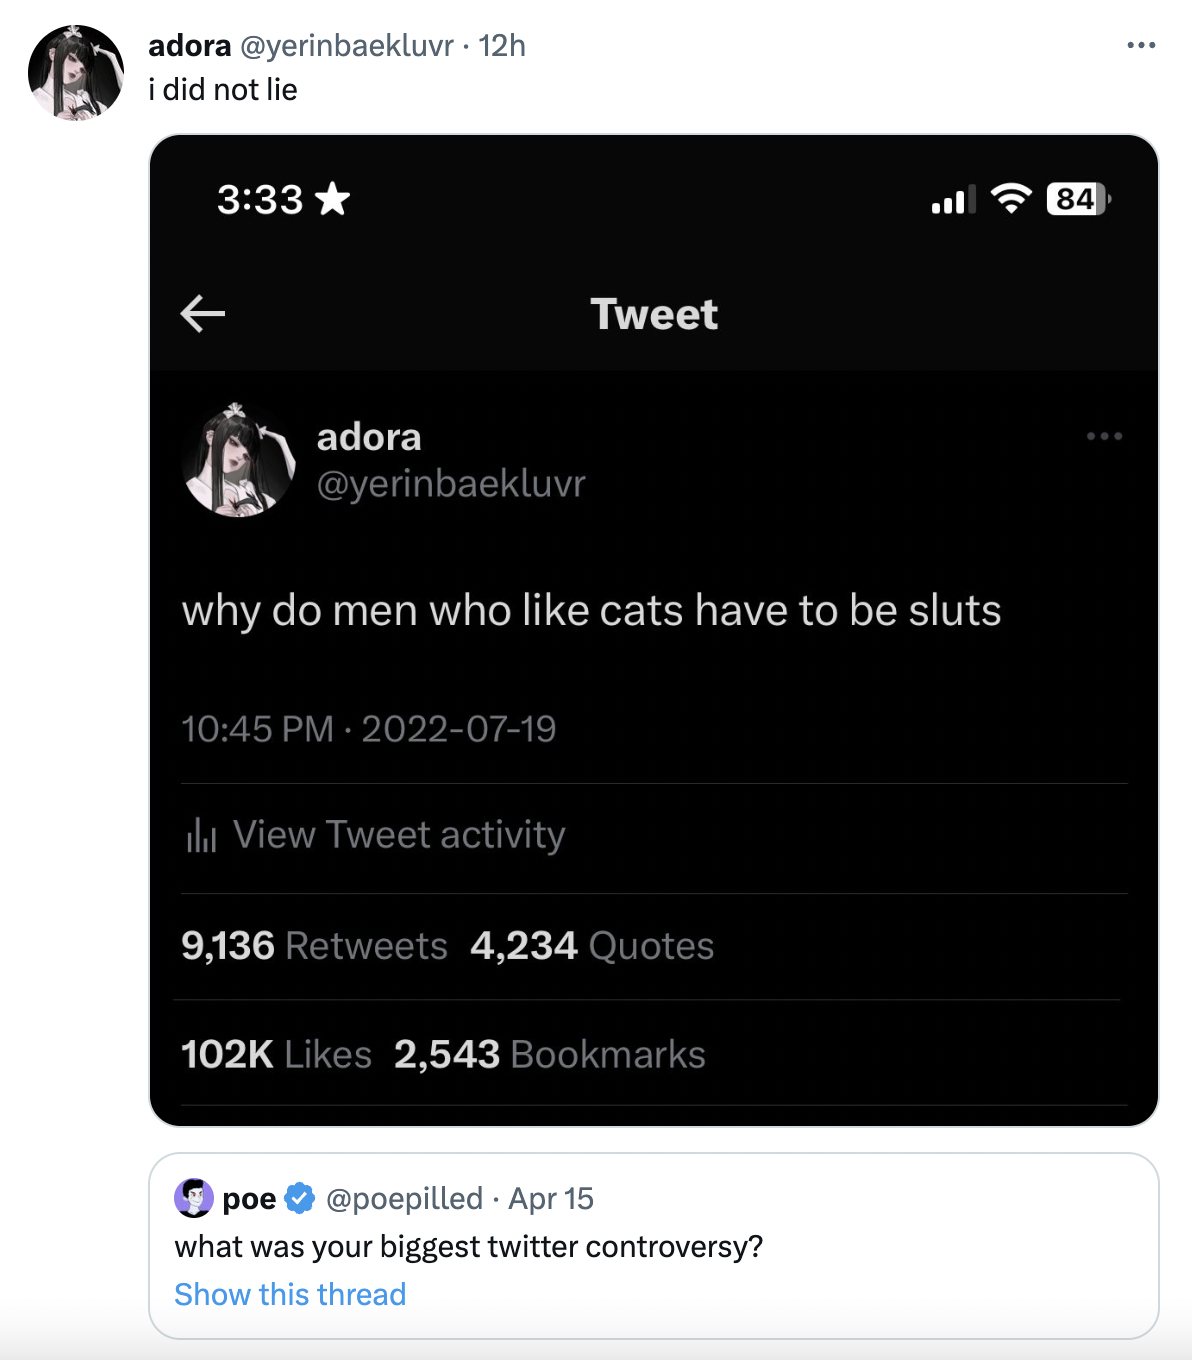 controversial tweets - screenshot -  i did not lie Tweet adora why do men who cats have to be sluts ill View Tweet activity